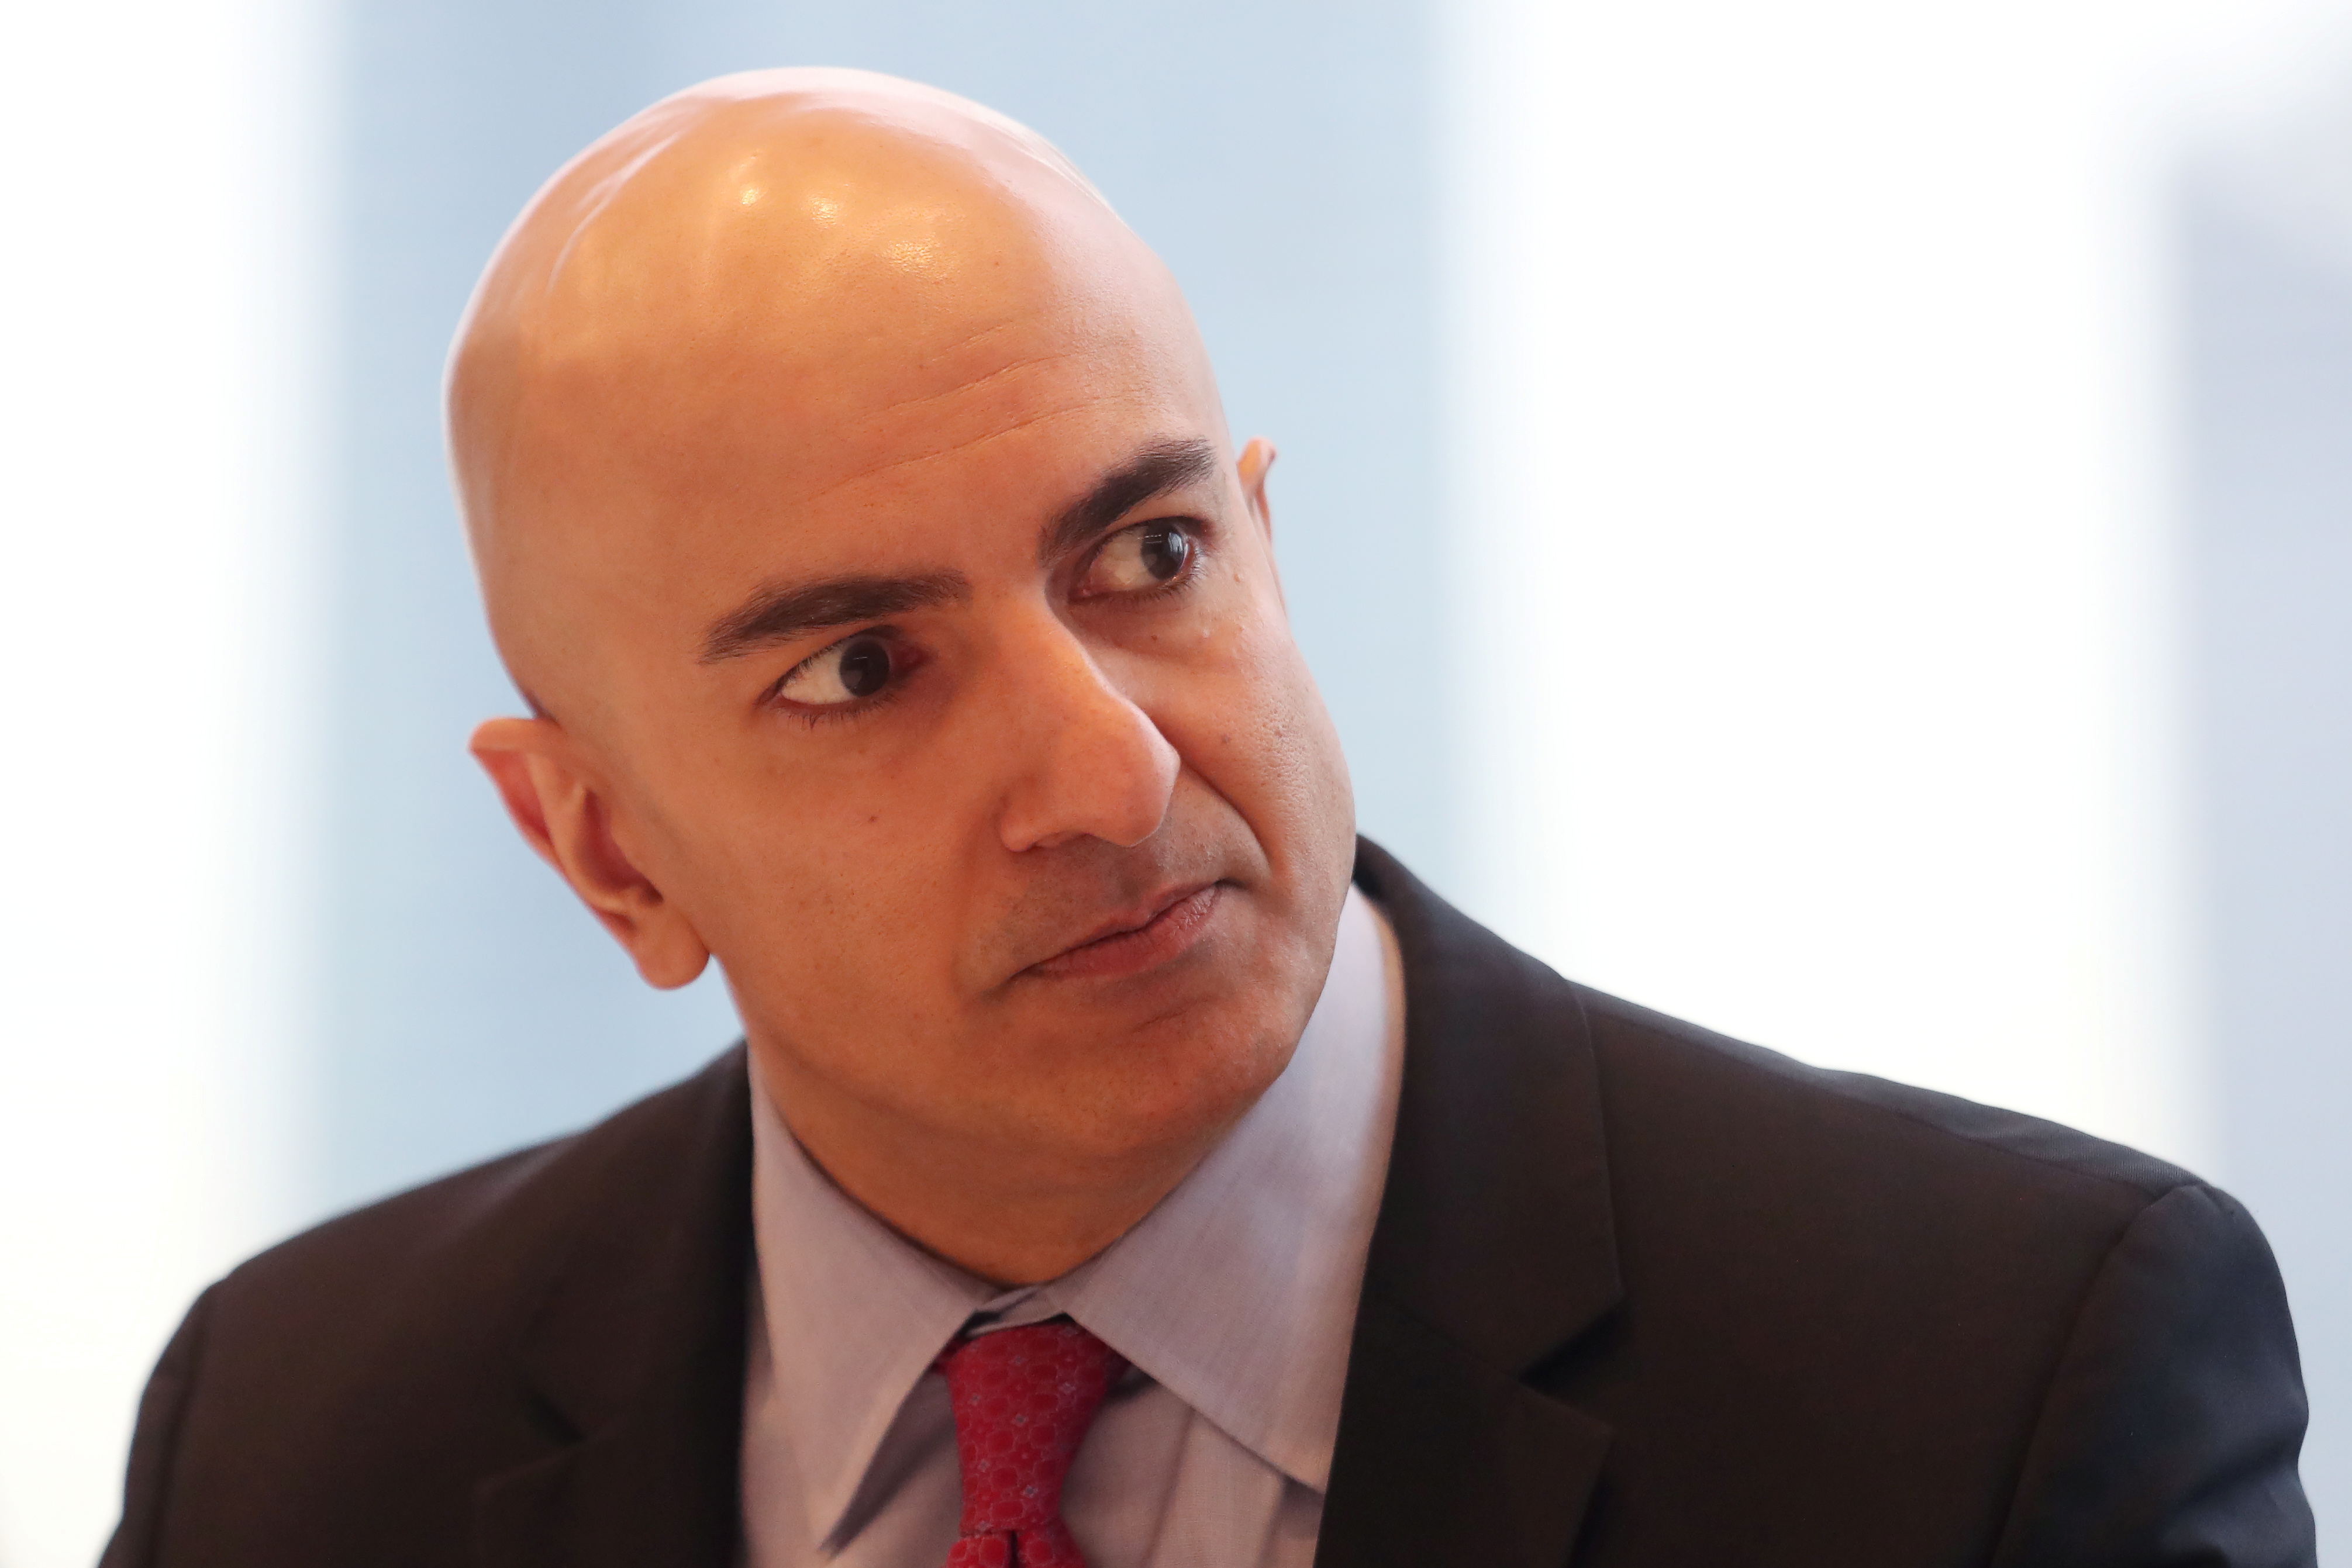 President of the Federal Reserve Bank on Minneapolis Neel Kashkari listens to a question during an interview in New York